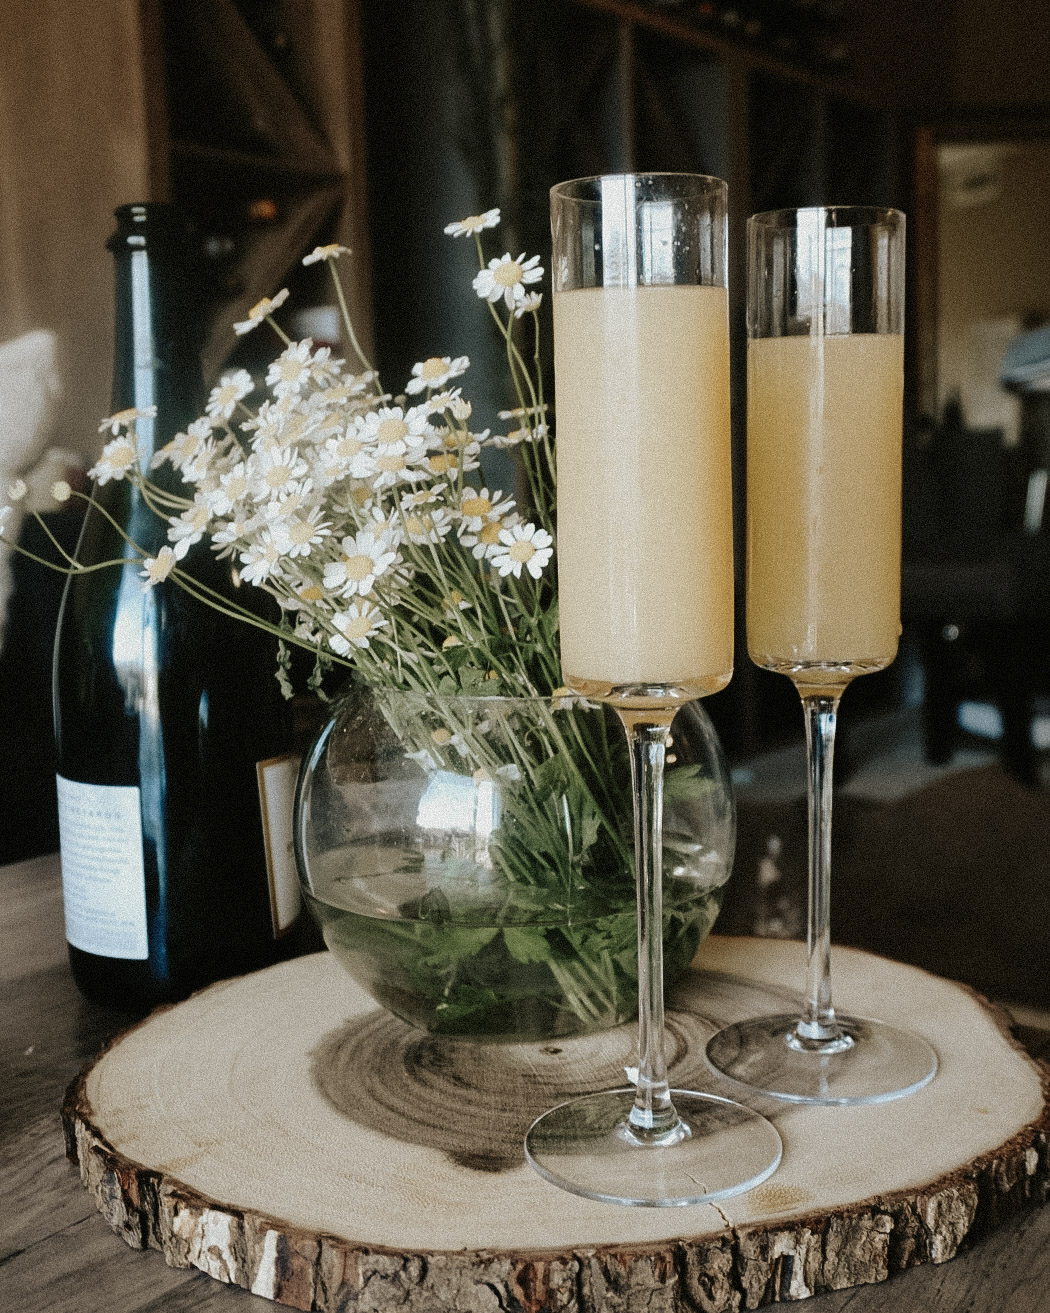 The Best Prosecco for Mimosas - two champagne flutes with flowers behind